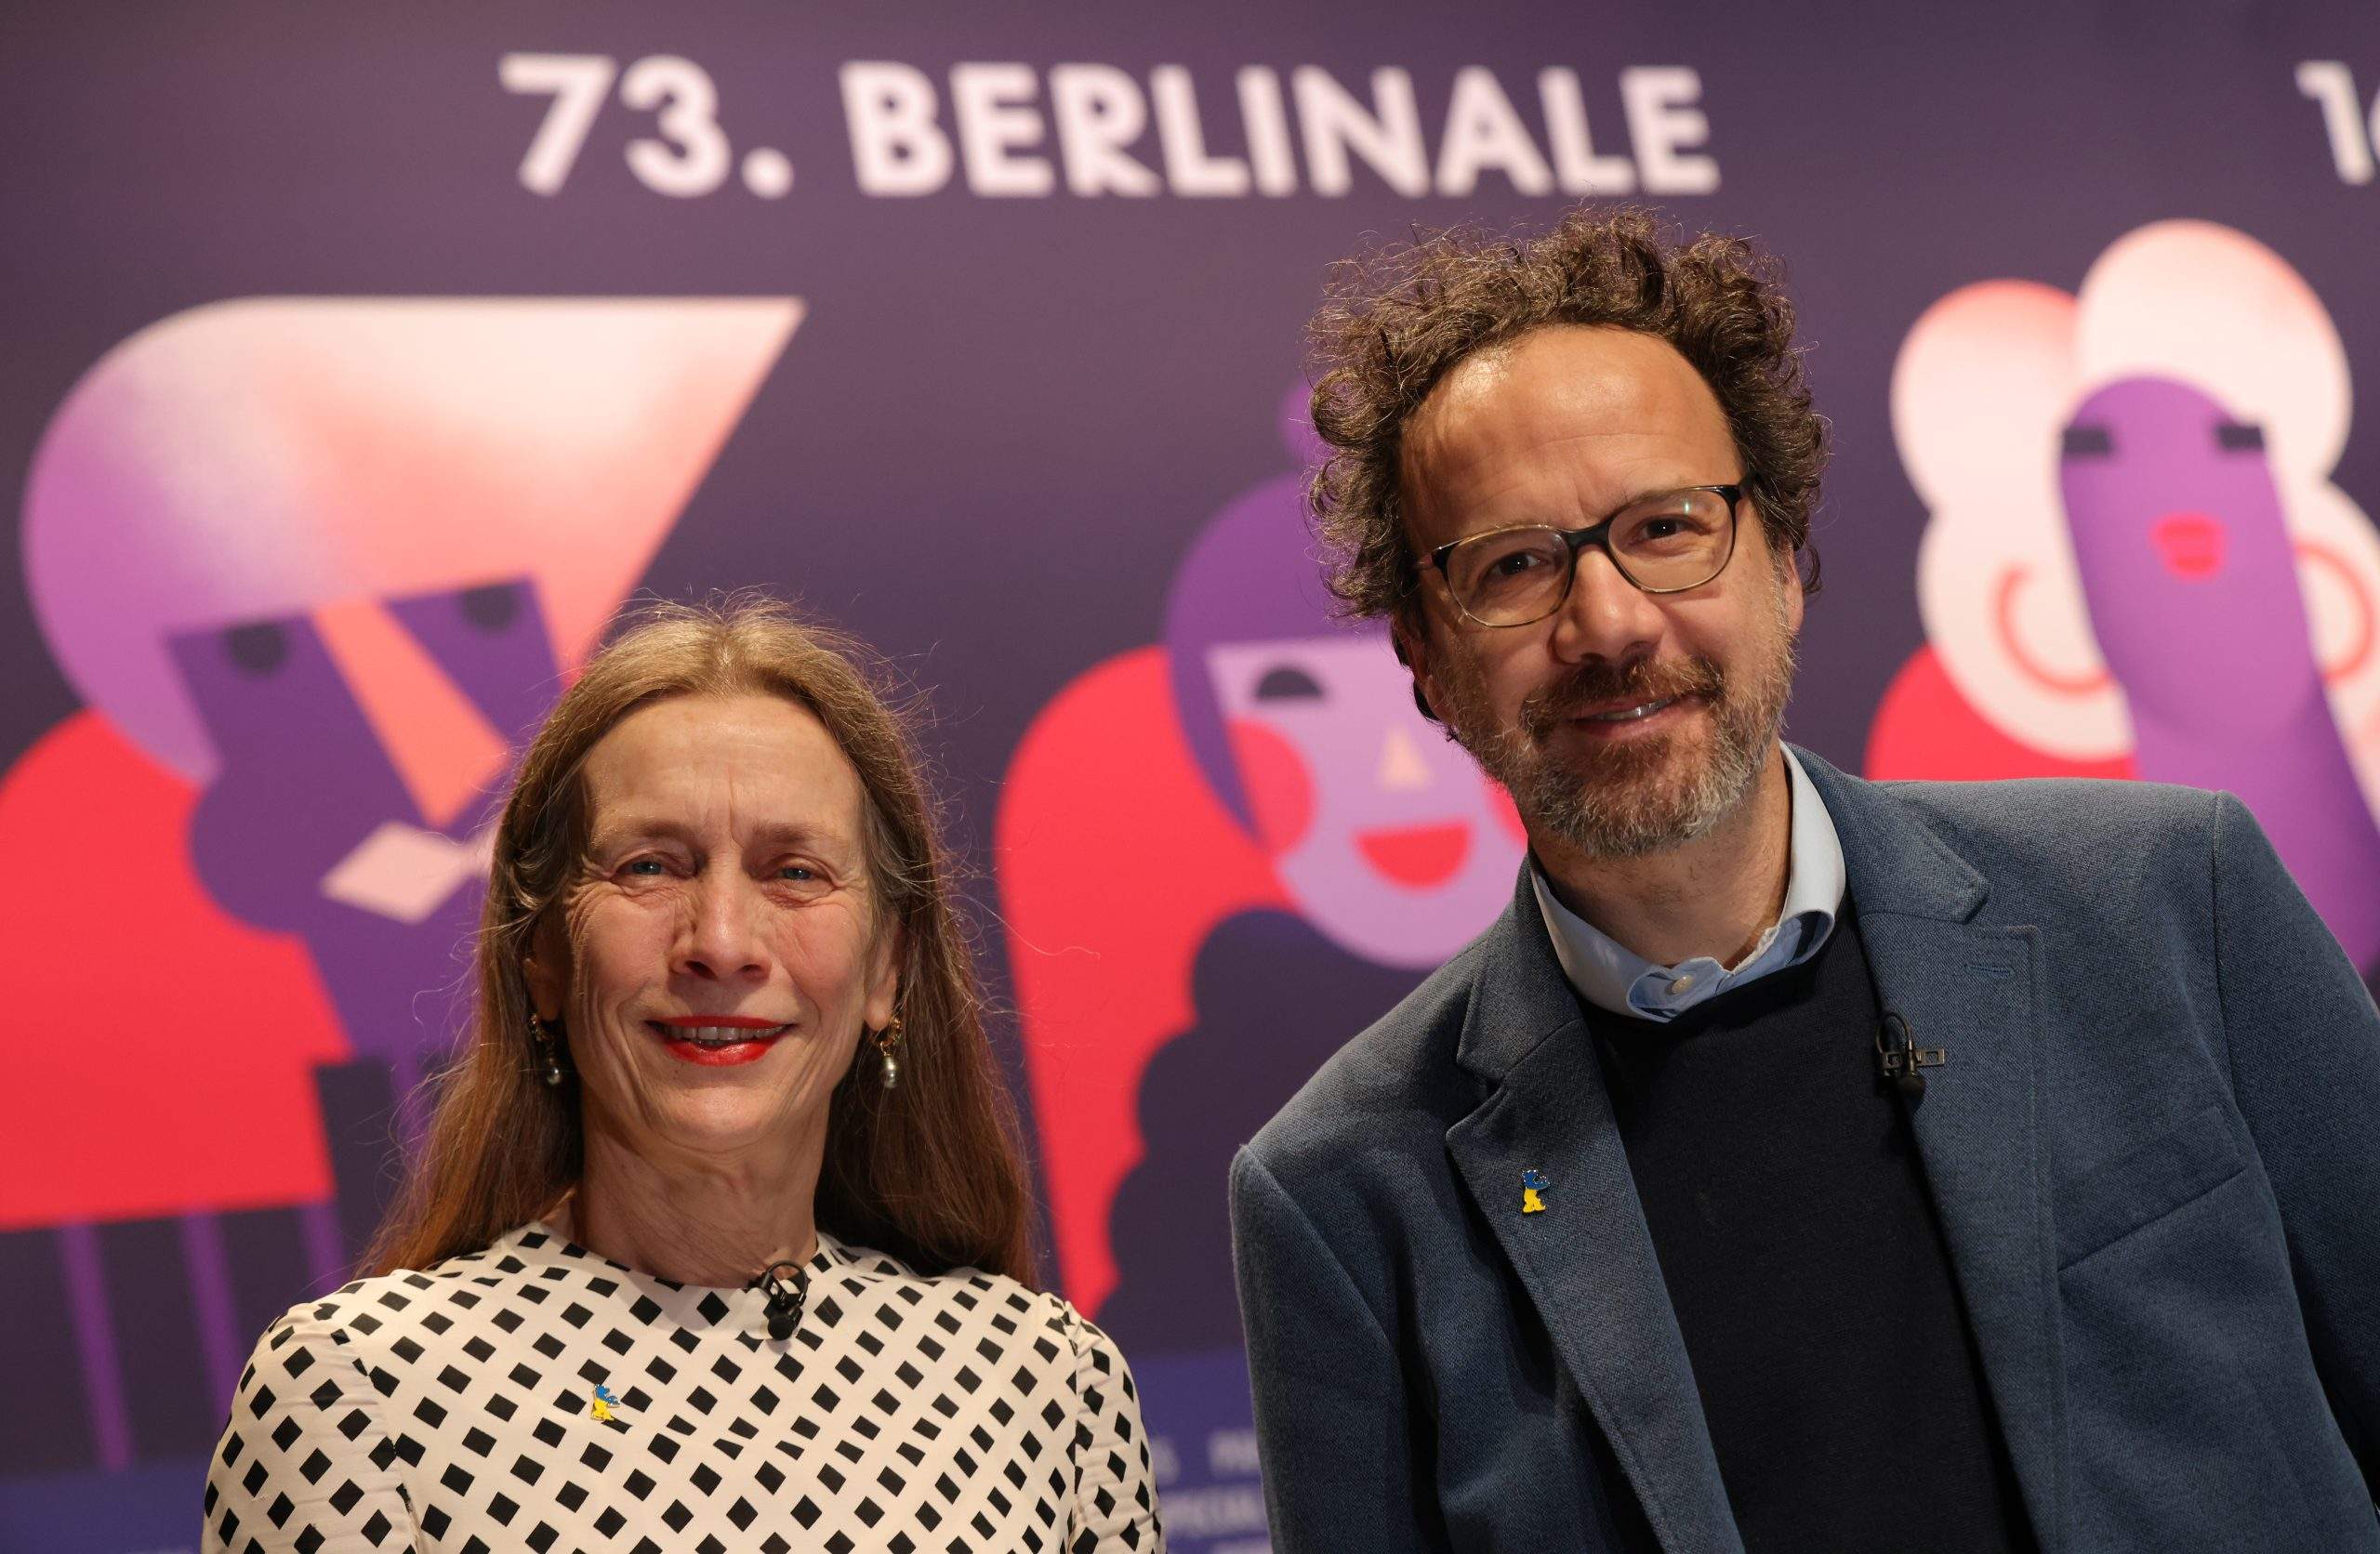 Berlinale chatrian scaled 9